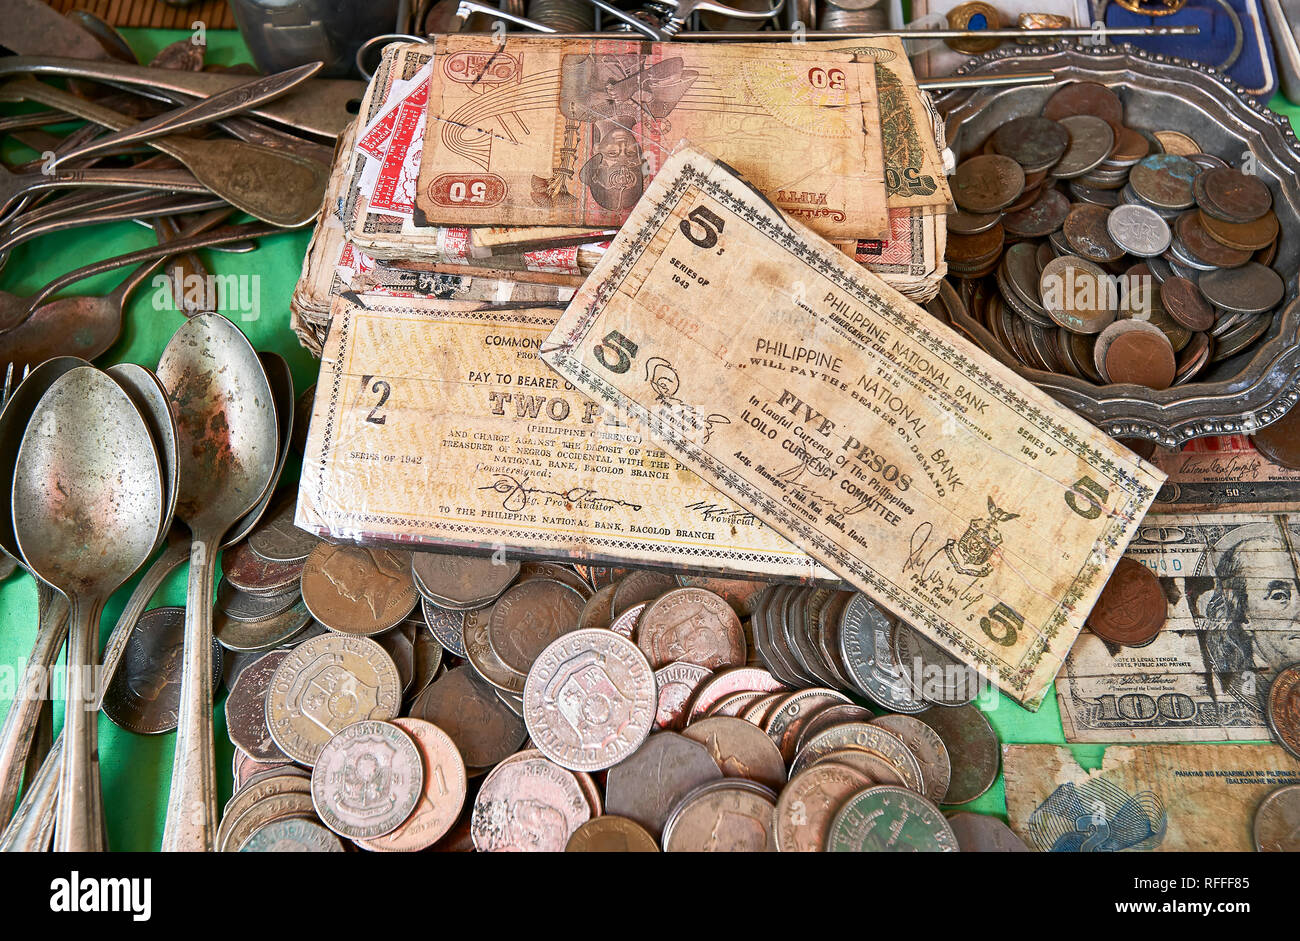 Very old Philippine bank notes and coins mixed with antique spoons on a table in a wet market in the city of Iloilo, Philippines Stock Photo